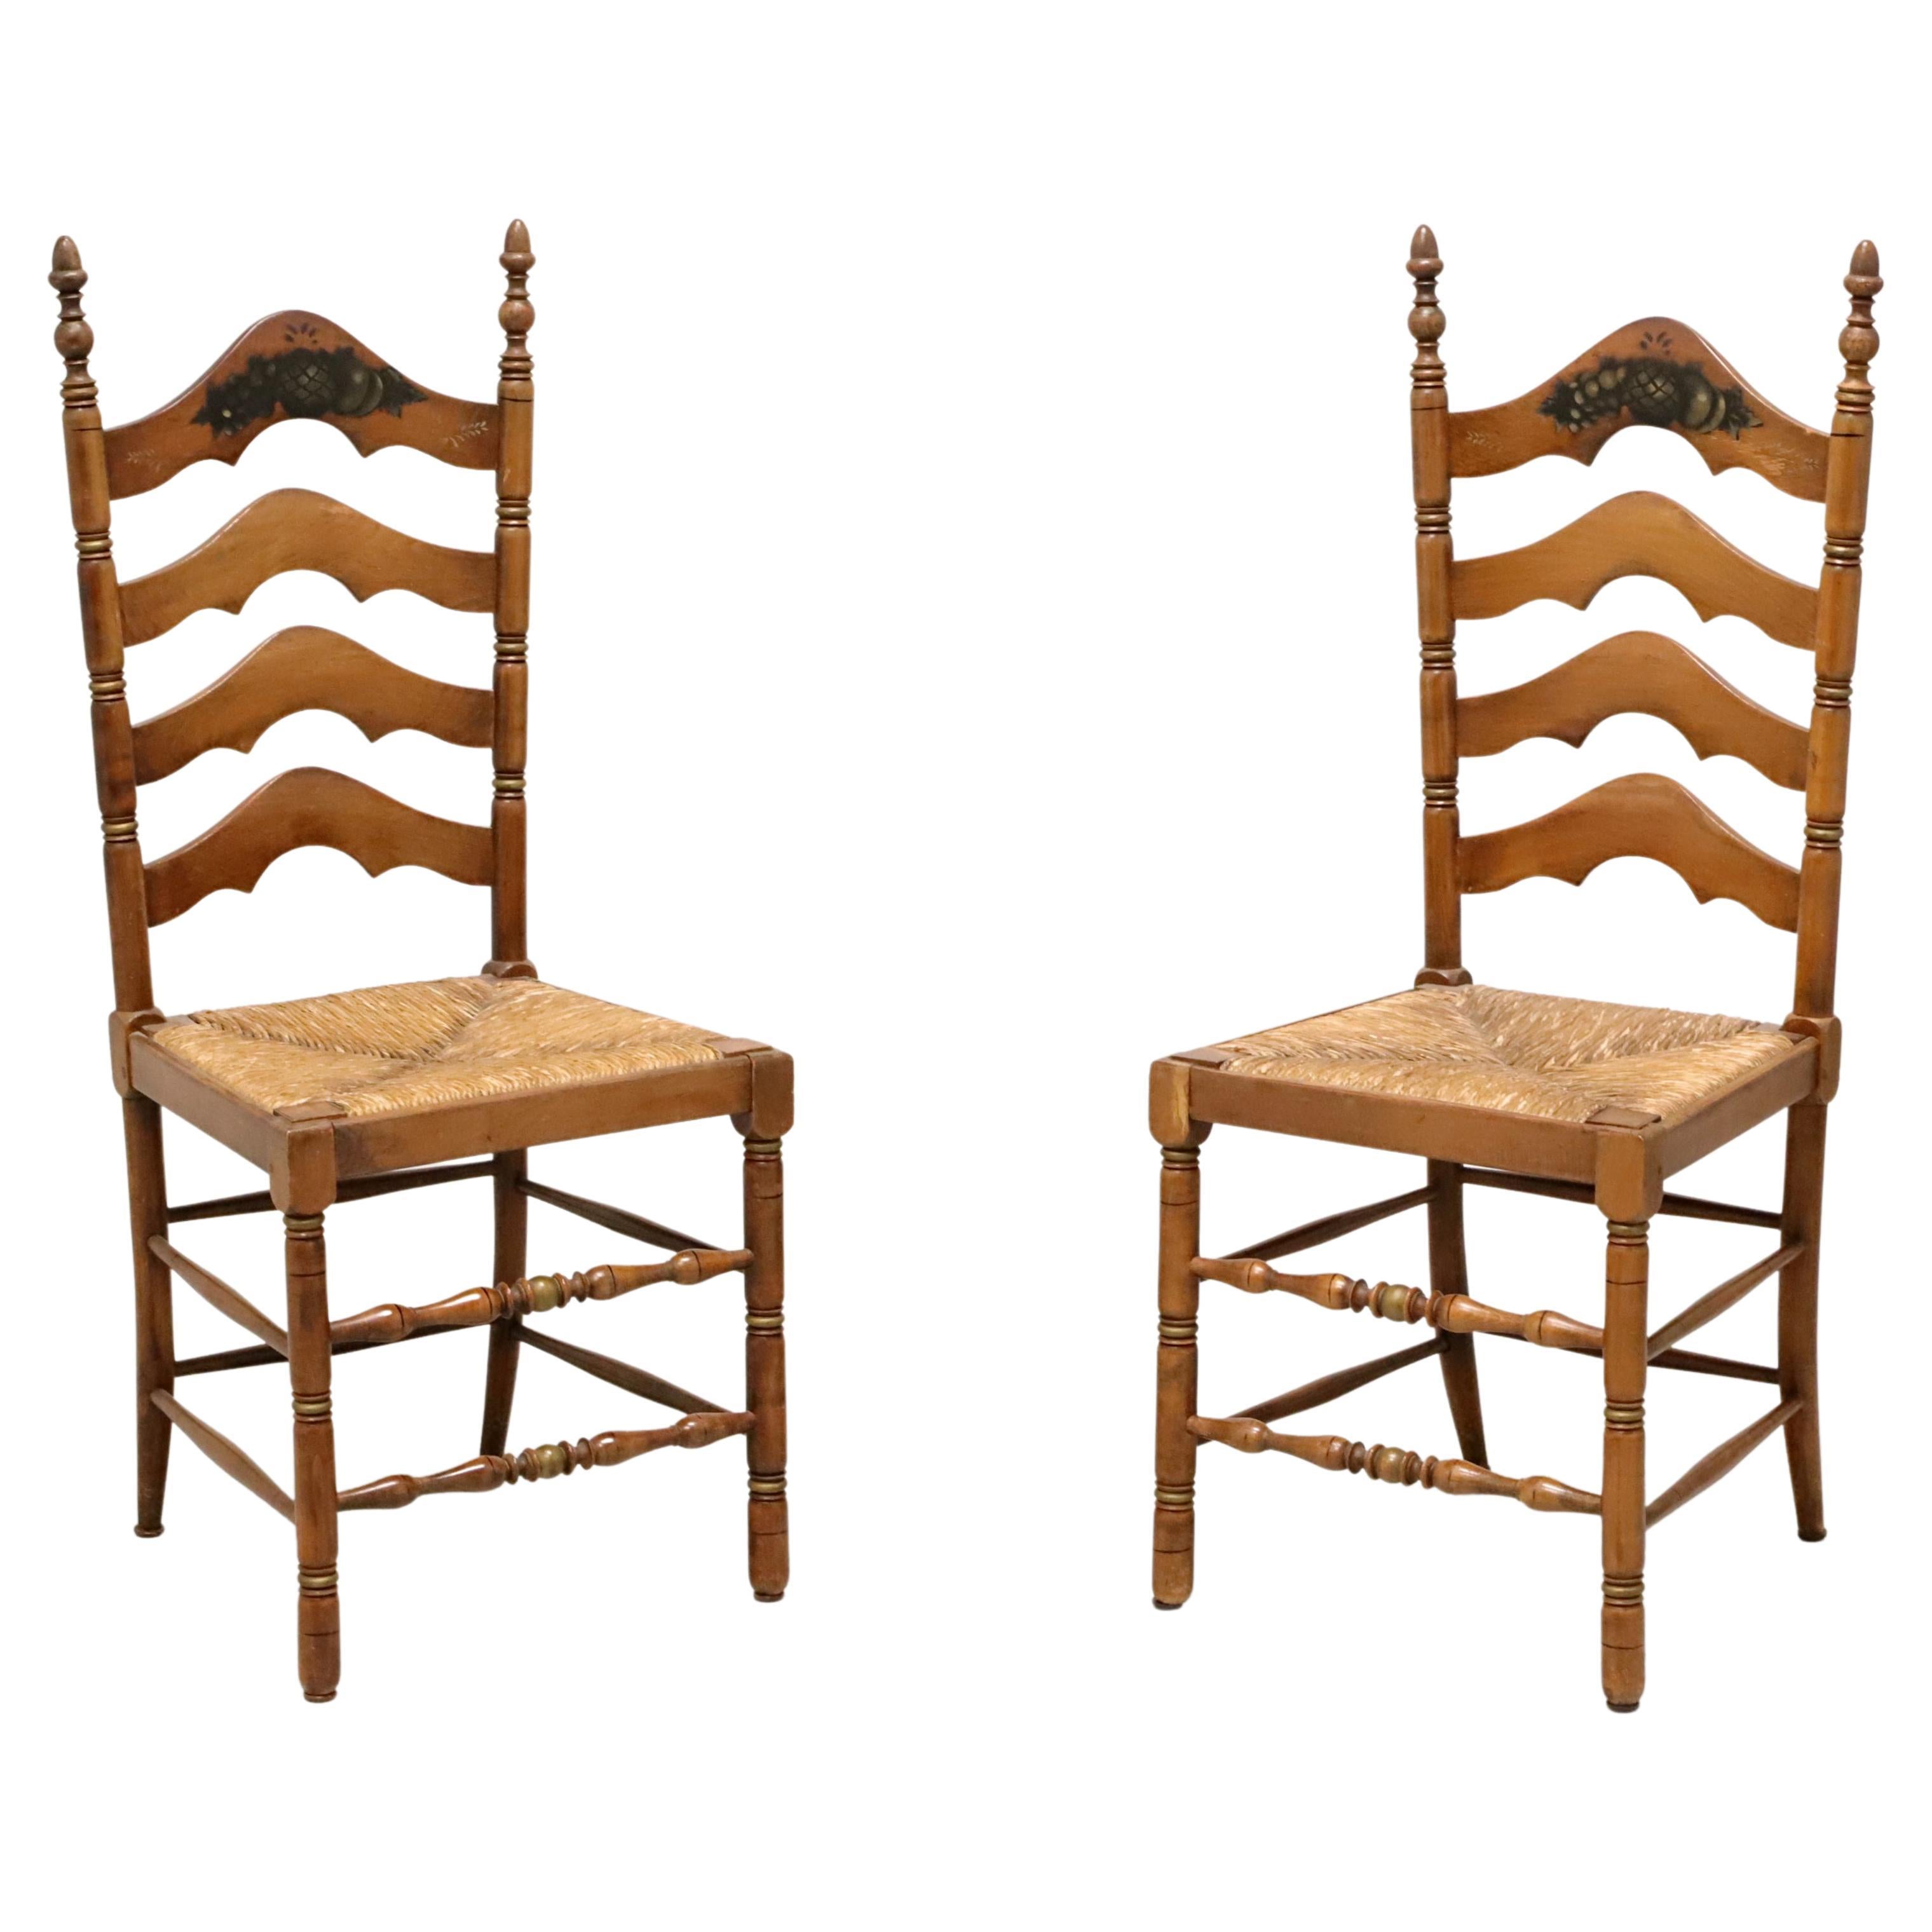 CAPE ANN CHAIRS Maple Ladder Back Dining Side Chairs with Rush Seats - Pair B For Sale